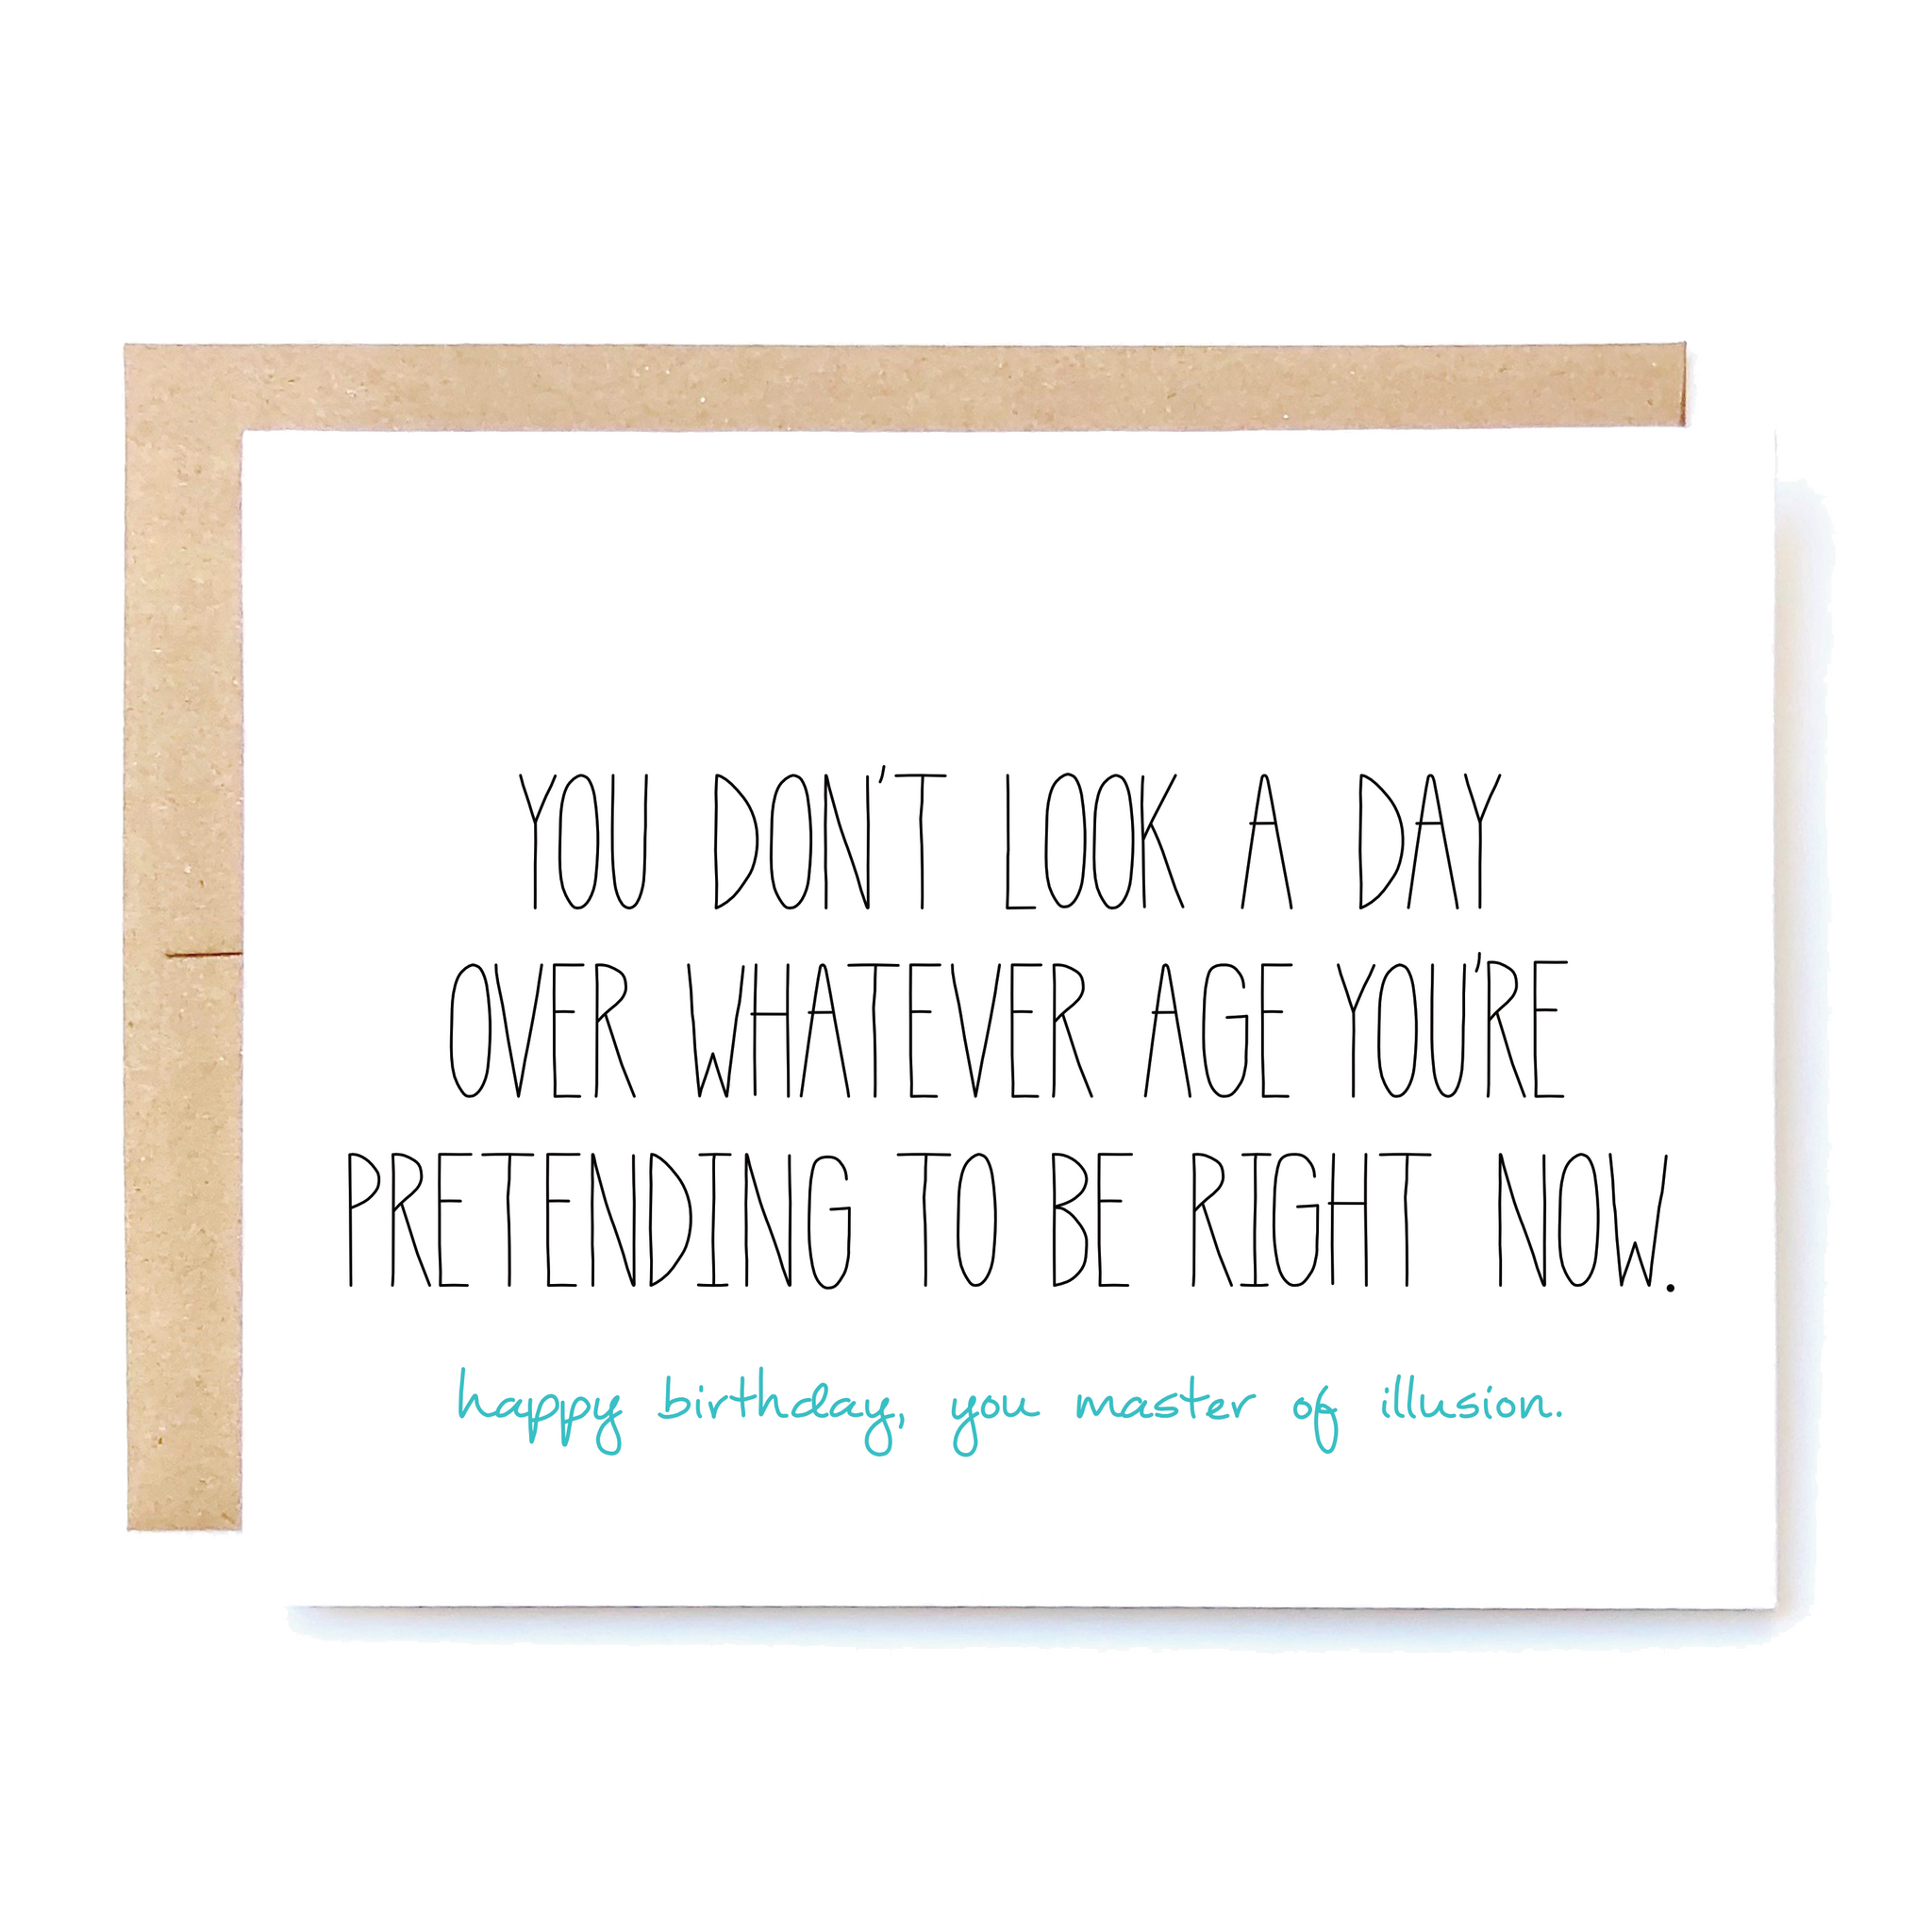 Card Front: You don't look a day over whatever age you are pretending to be right now.  Happy birthday, you master of illusion.